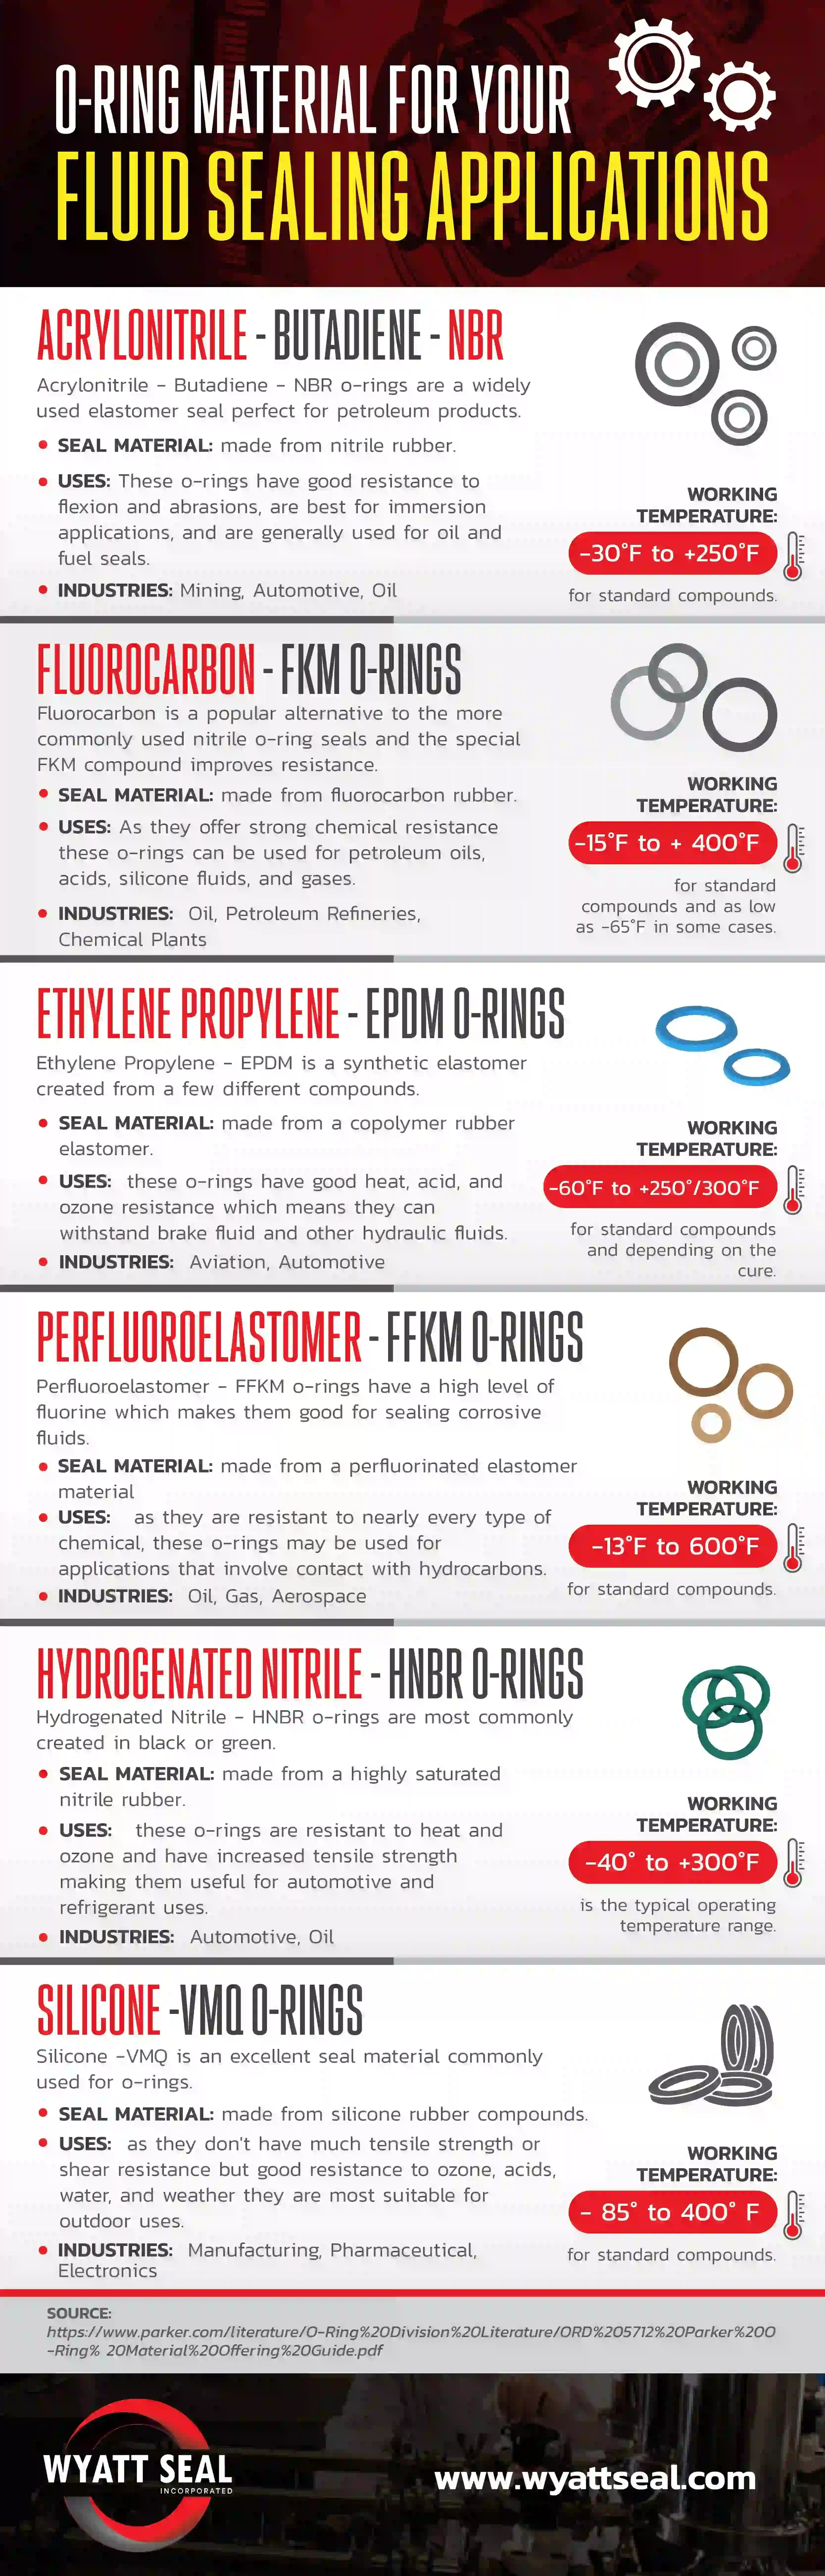 Wyatt_O-Ring_Material_for_Your_Sealing_Applications_Infographic_1_1 (compressed)